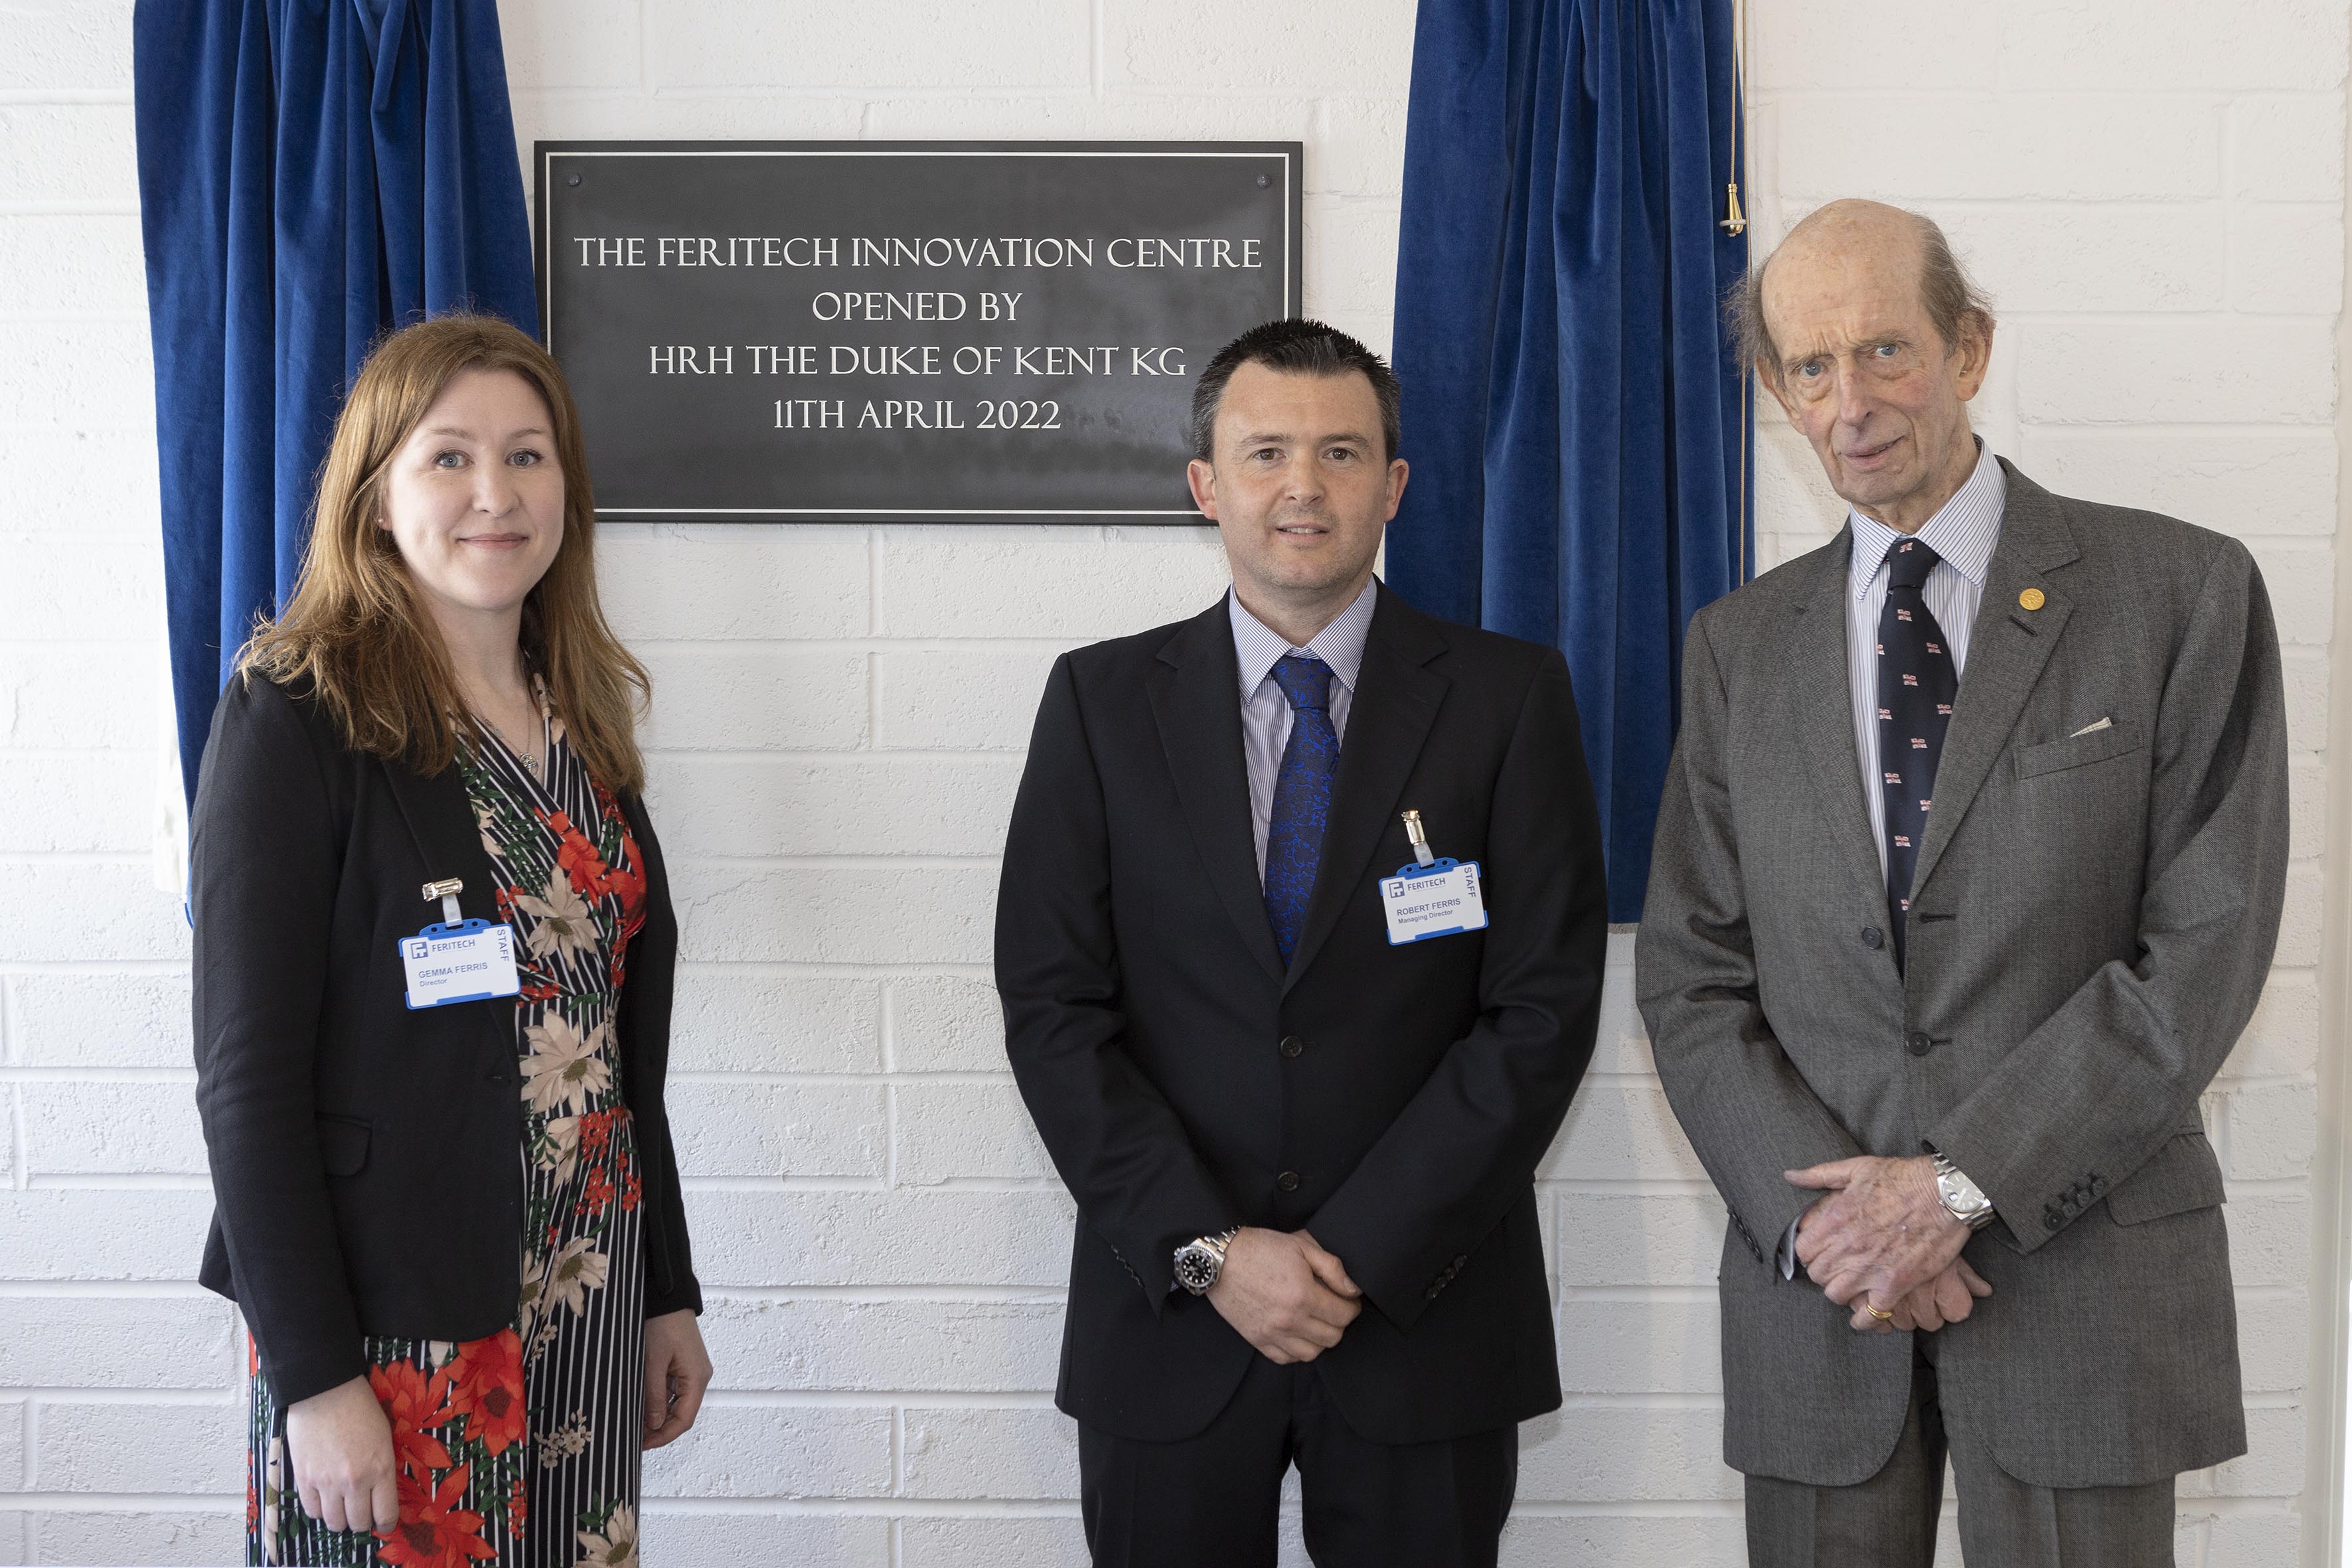 Image of Feritech Global team at the opening of the Feritech Innovation Centre in Cornwall, April 2022 